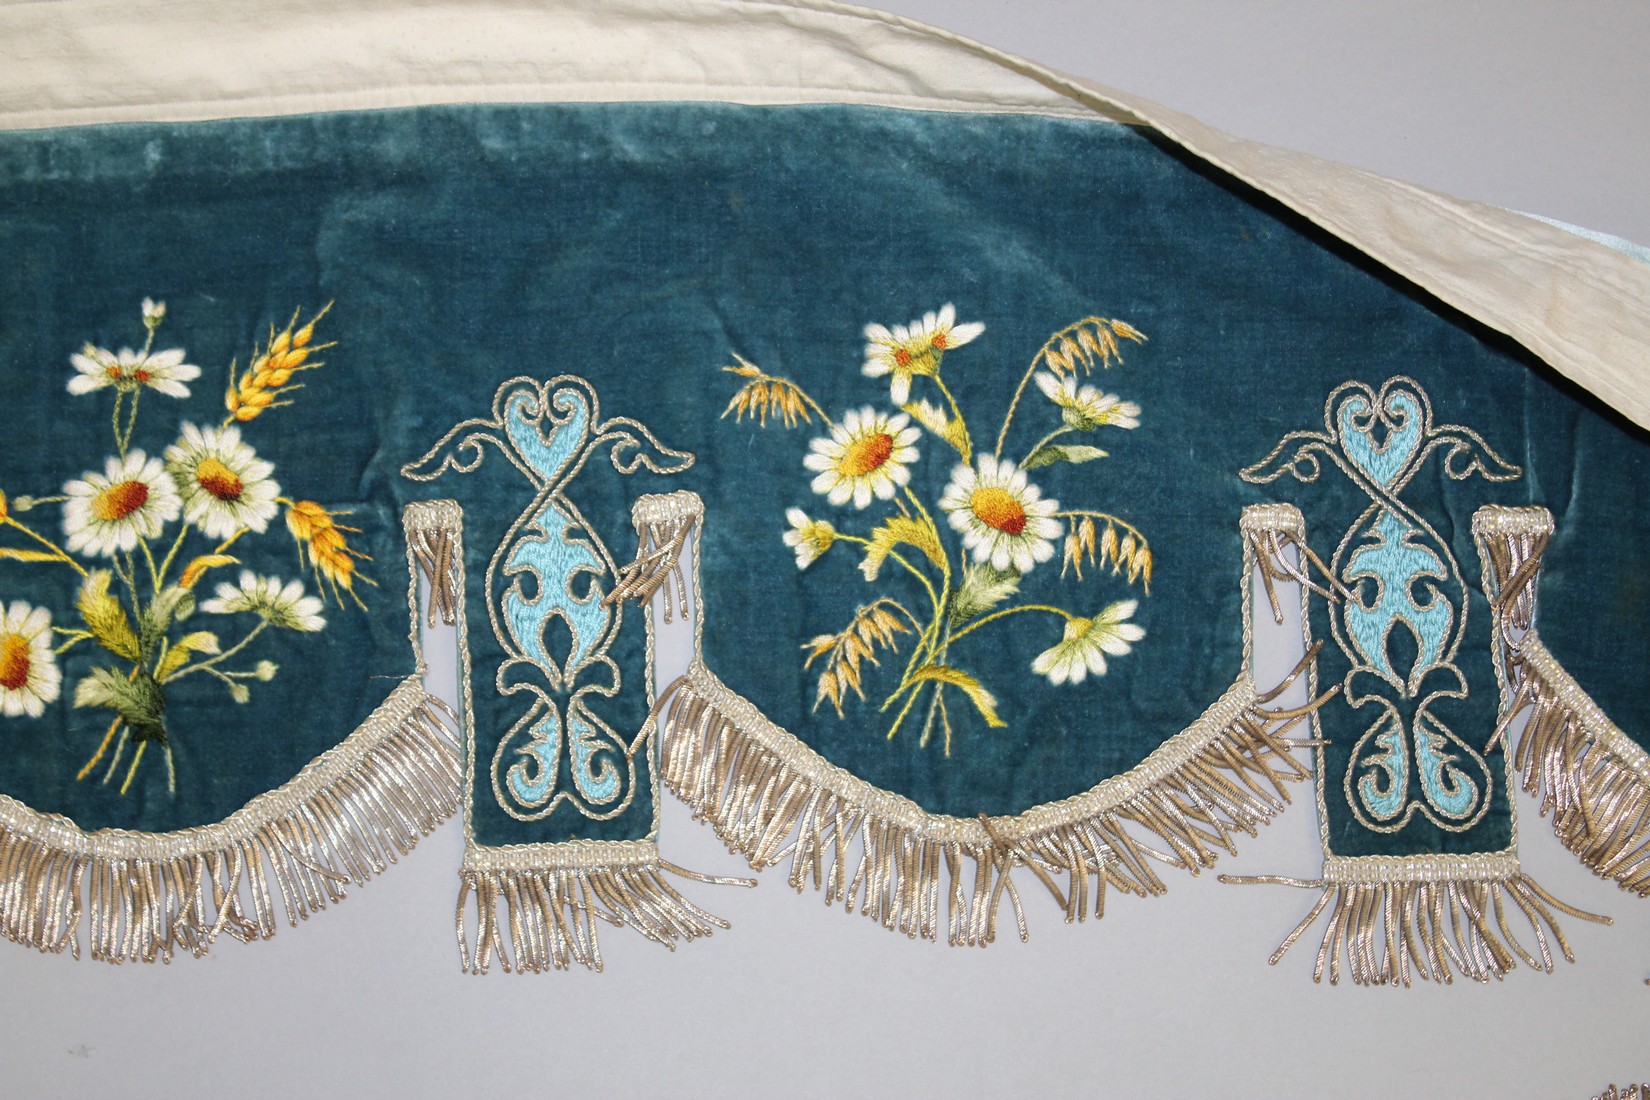 A FINELY EMBROIDERED BLUE VELVET BED HANGING. - Image 7 of 9